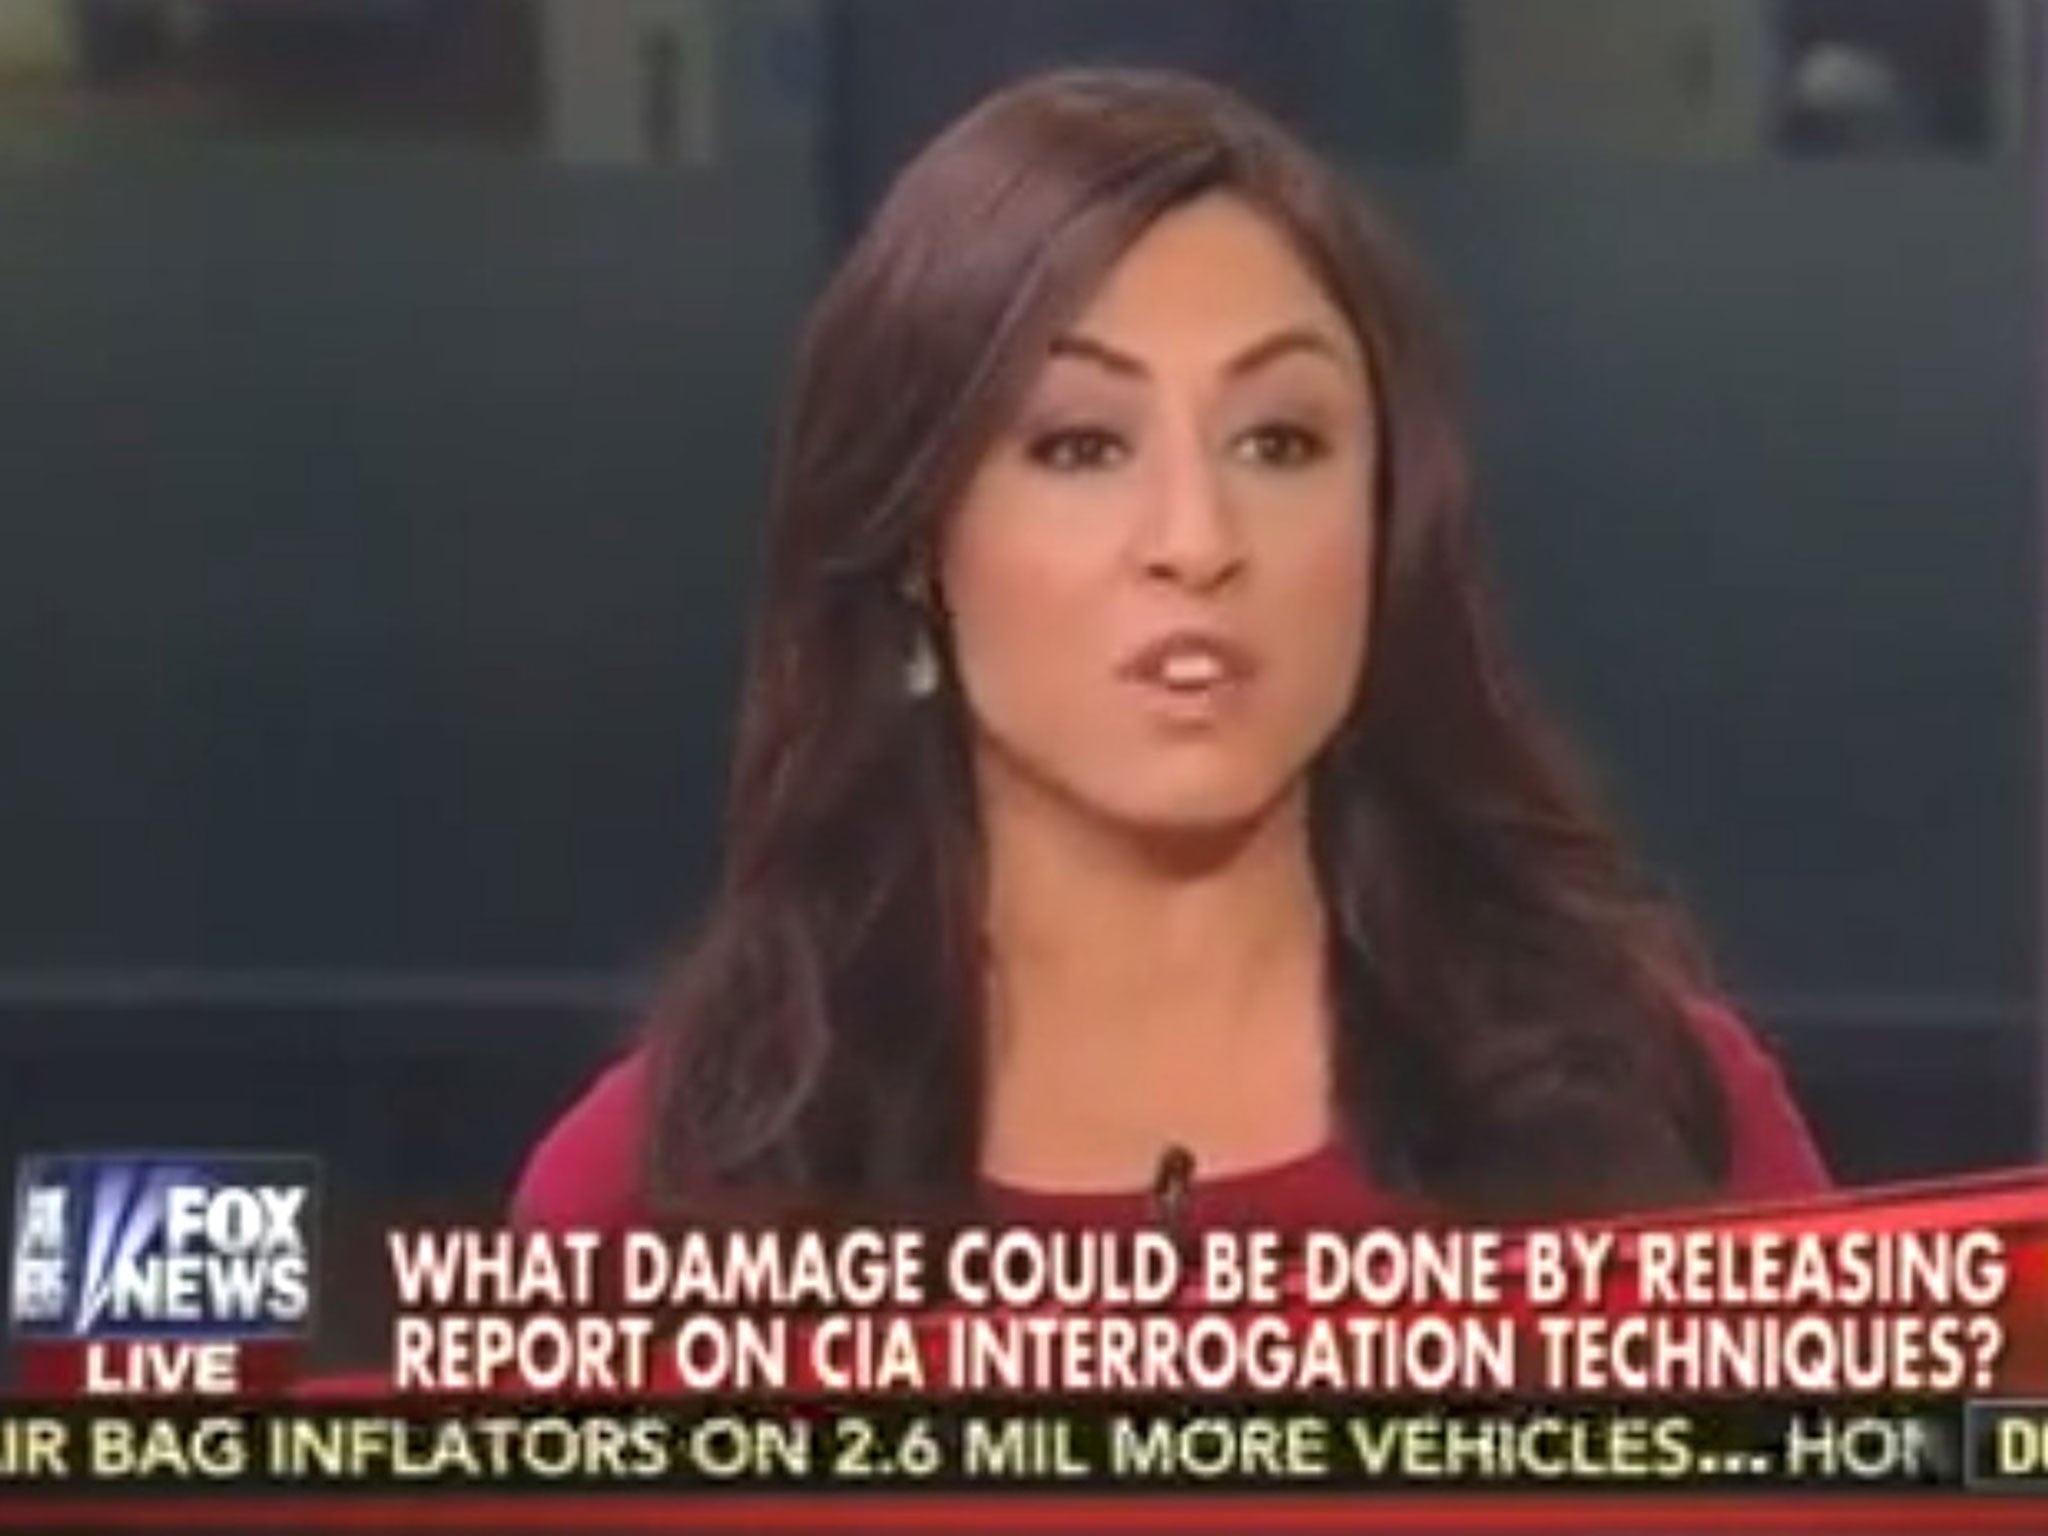 Fox News says 'the US is awesome' – and torture report is just 'one last shot at Bush'